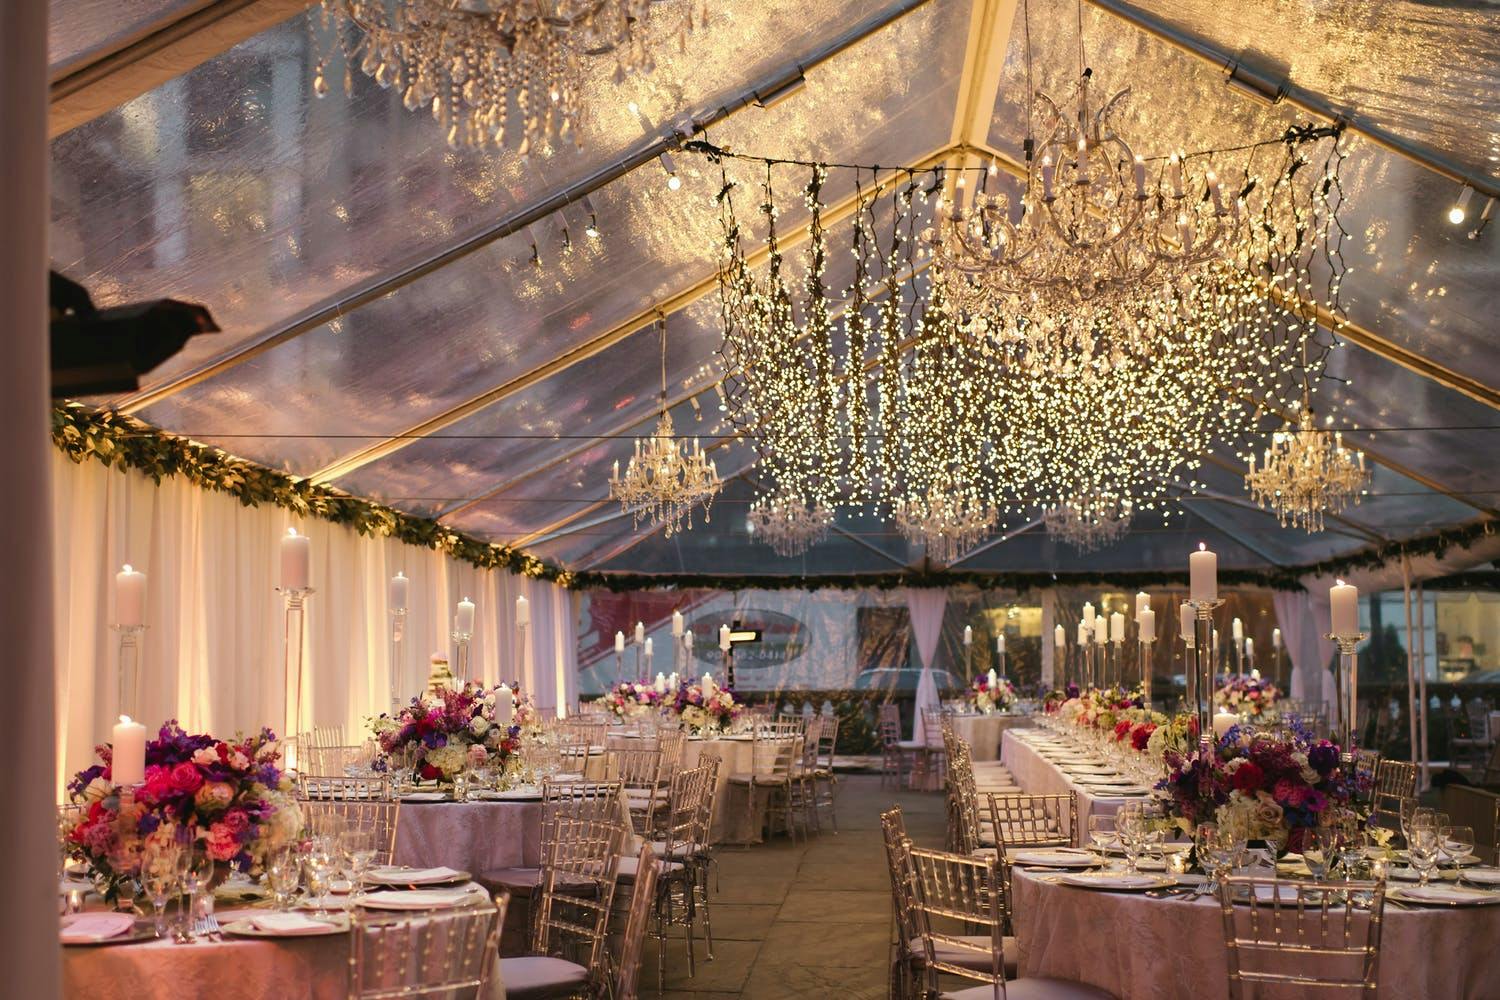 Transparent Wedding Tent With Shimmering Fairy Light Ceiling Installation | PartySlate